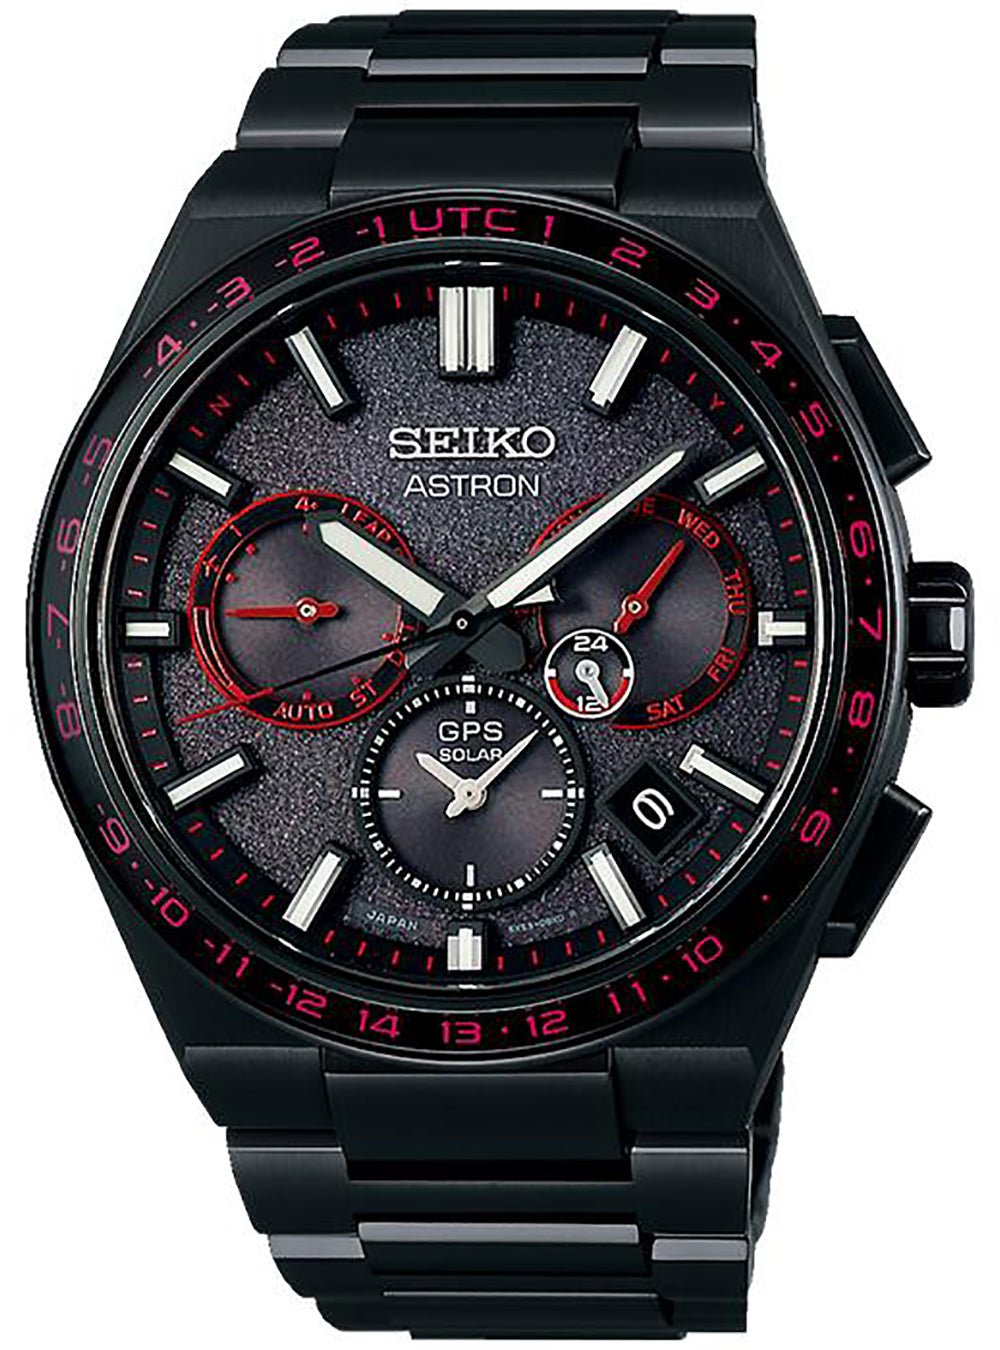 SEIKO ASTRON NEXTER GPS SOLAR 2023 LIMITED EDITION SBXC137 MADE IN JAPAN JDM